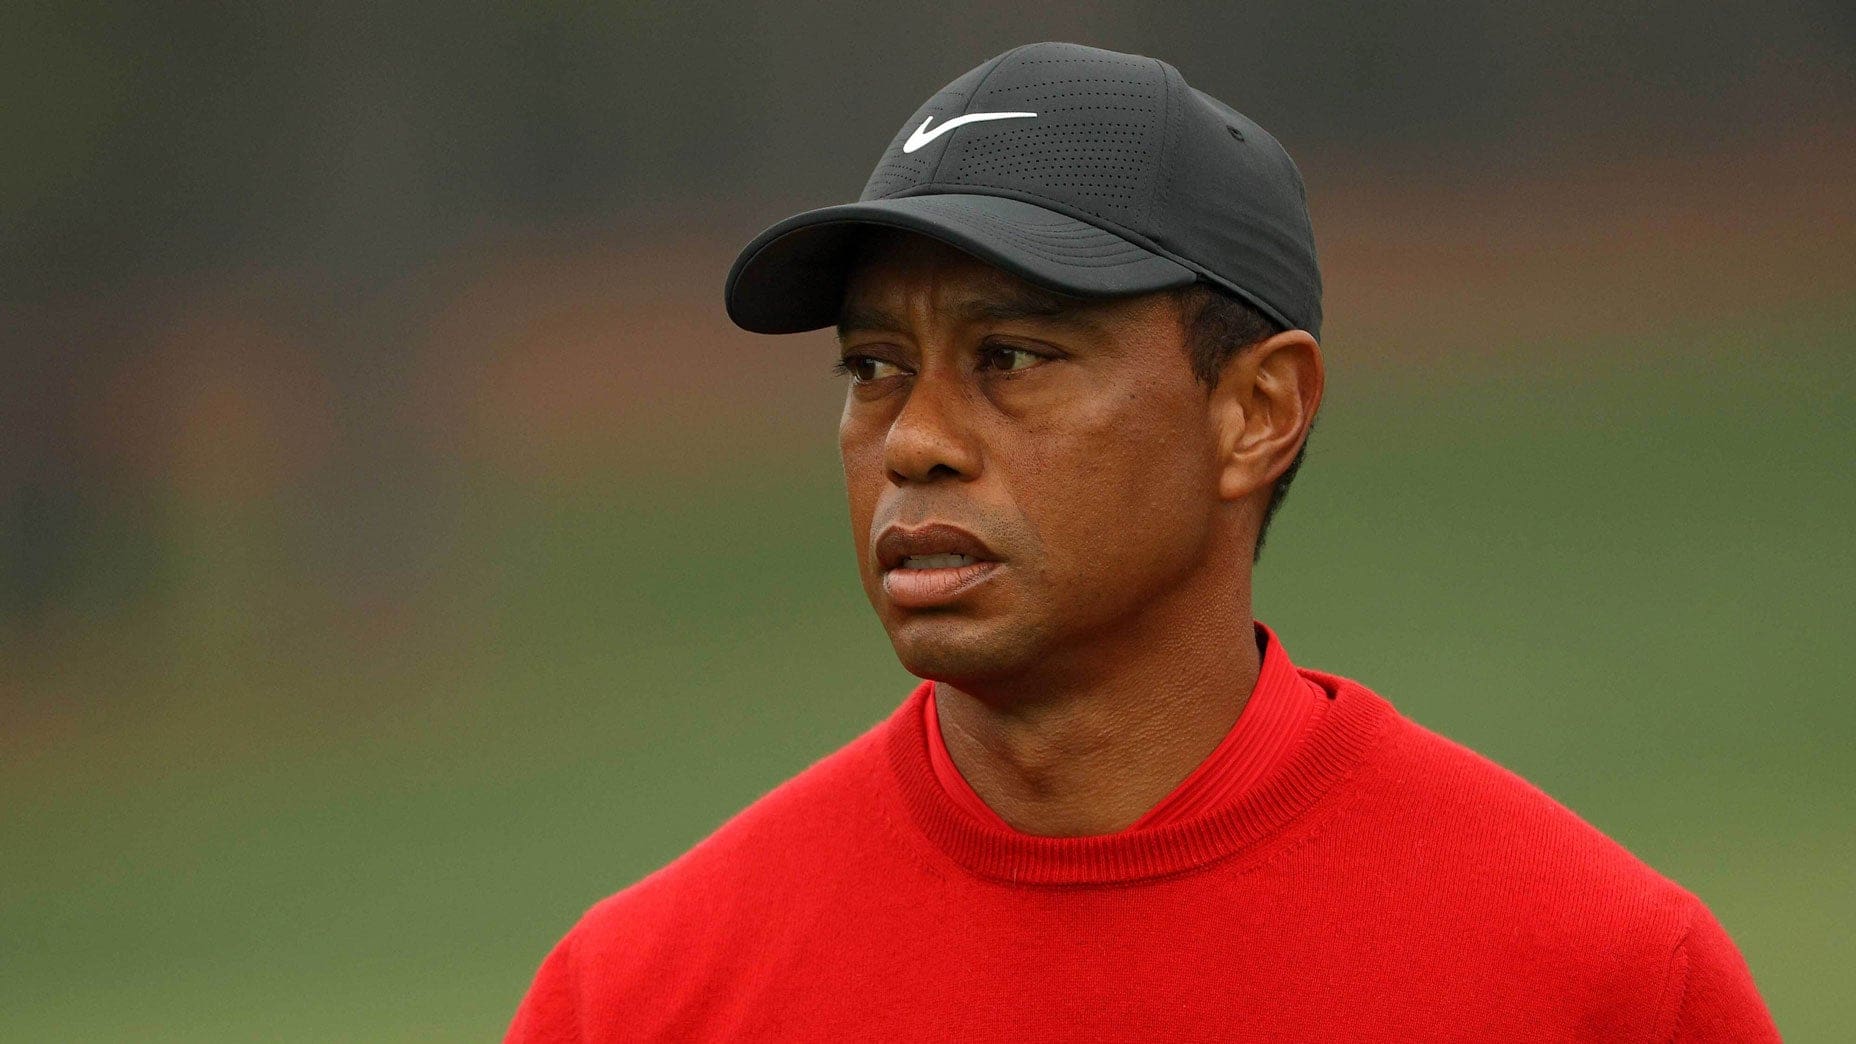 ”tiger-woods-says-that-rehab-after-his-scary-accident-was-the-most-painful-experience-of-his-life”